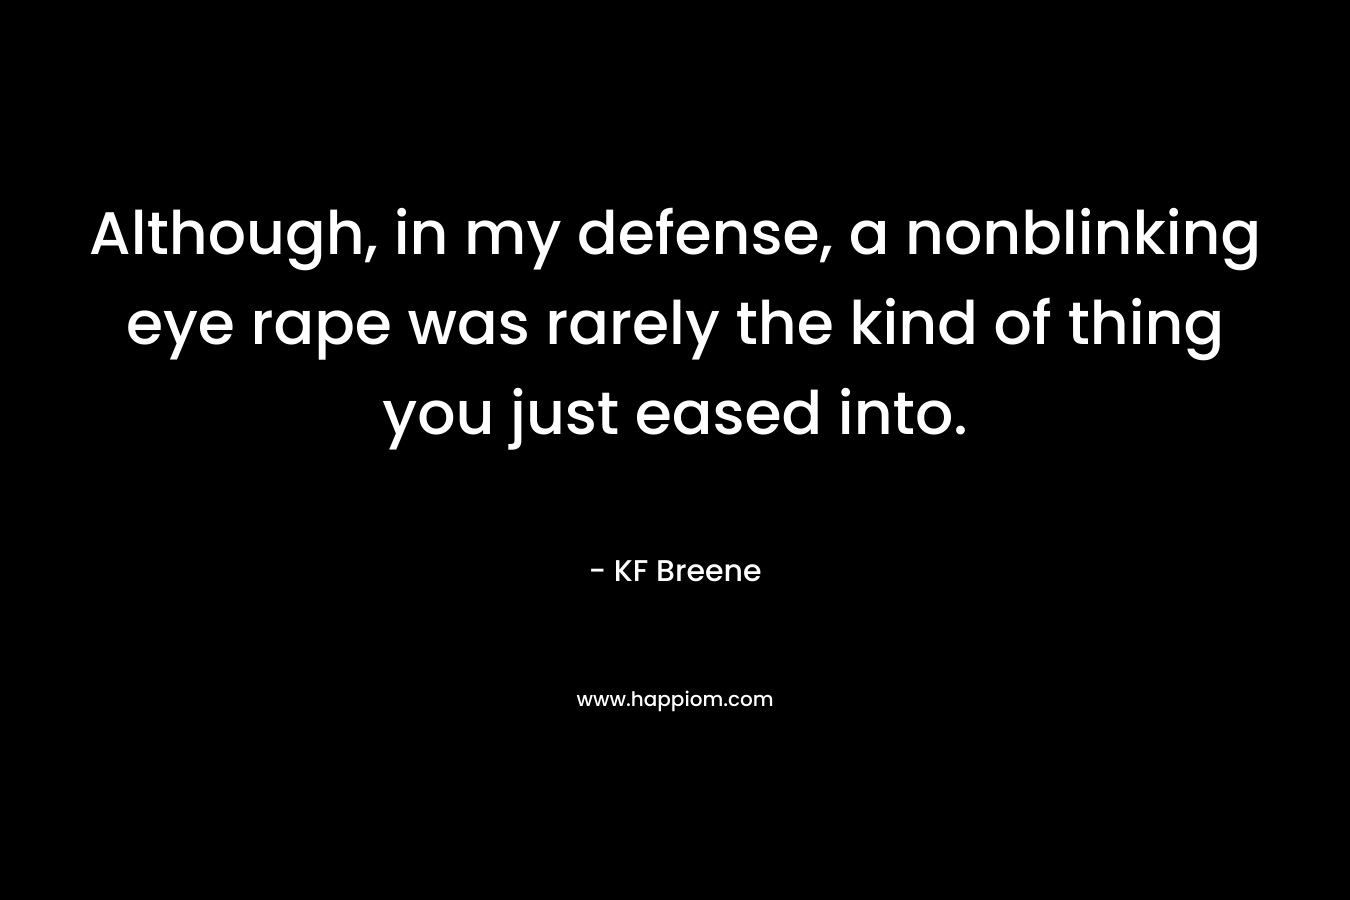 Although, in my defense, a nonblinking eye rape was rarely the kind of thing you just eased into.